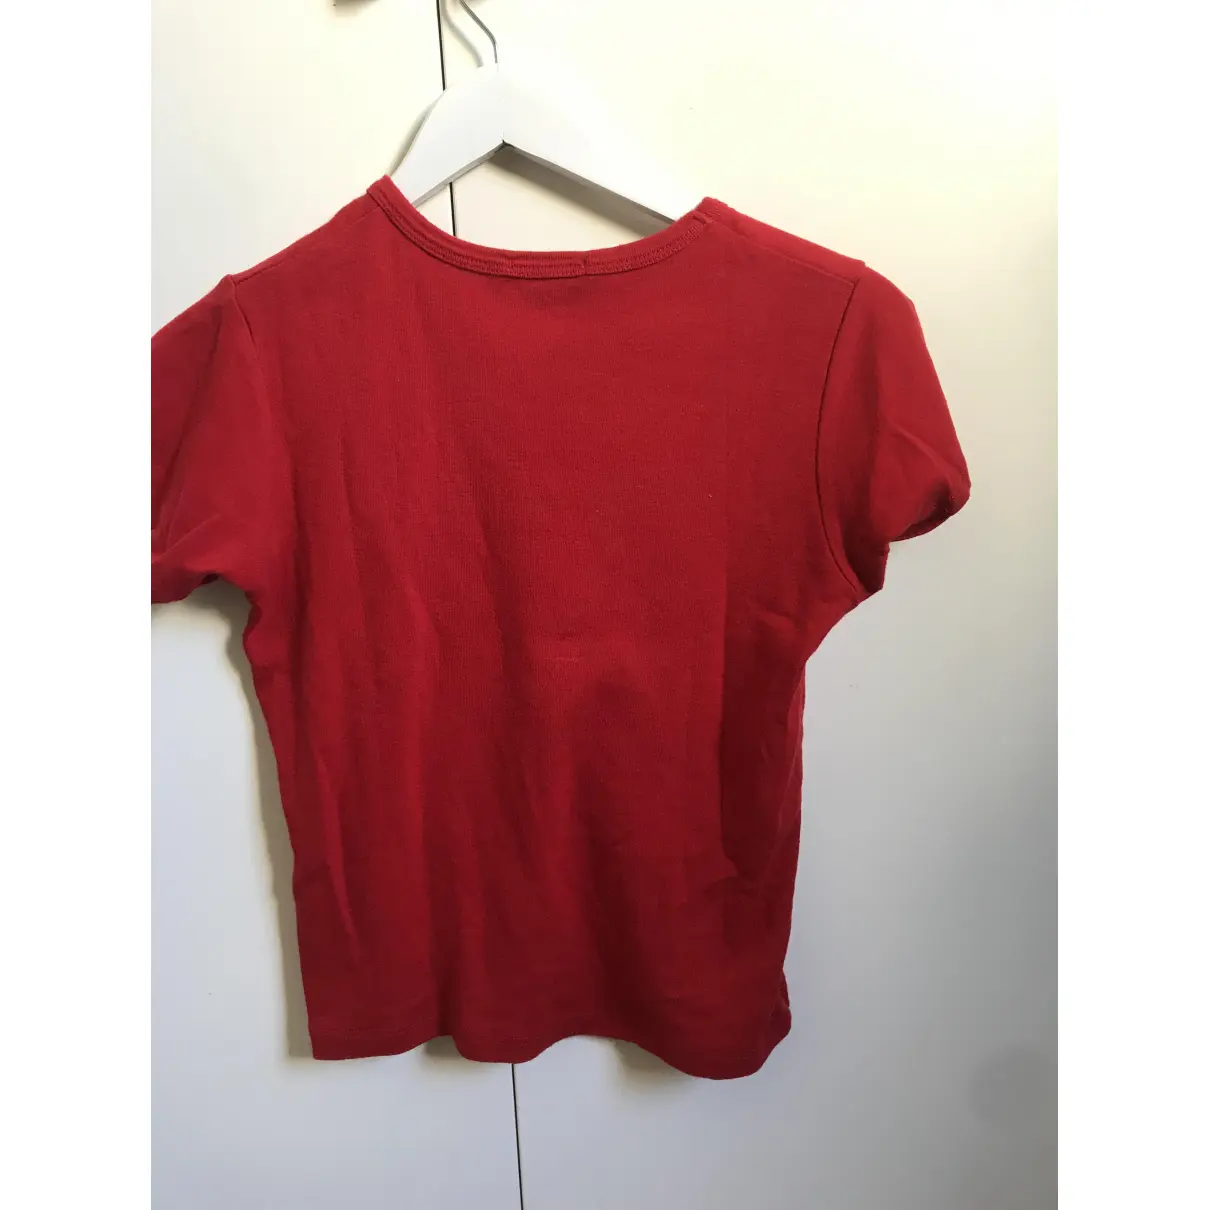 Buy Brandy Melville Red Polyester Top online